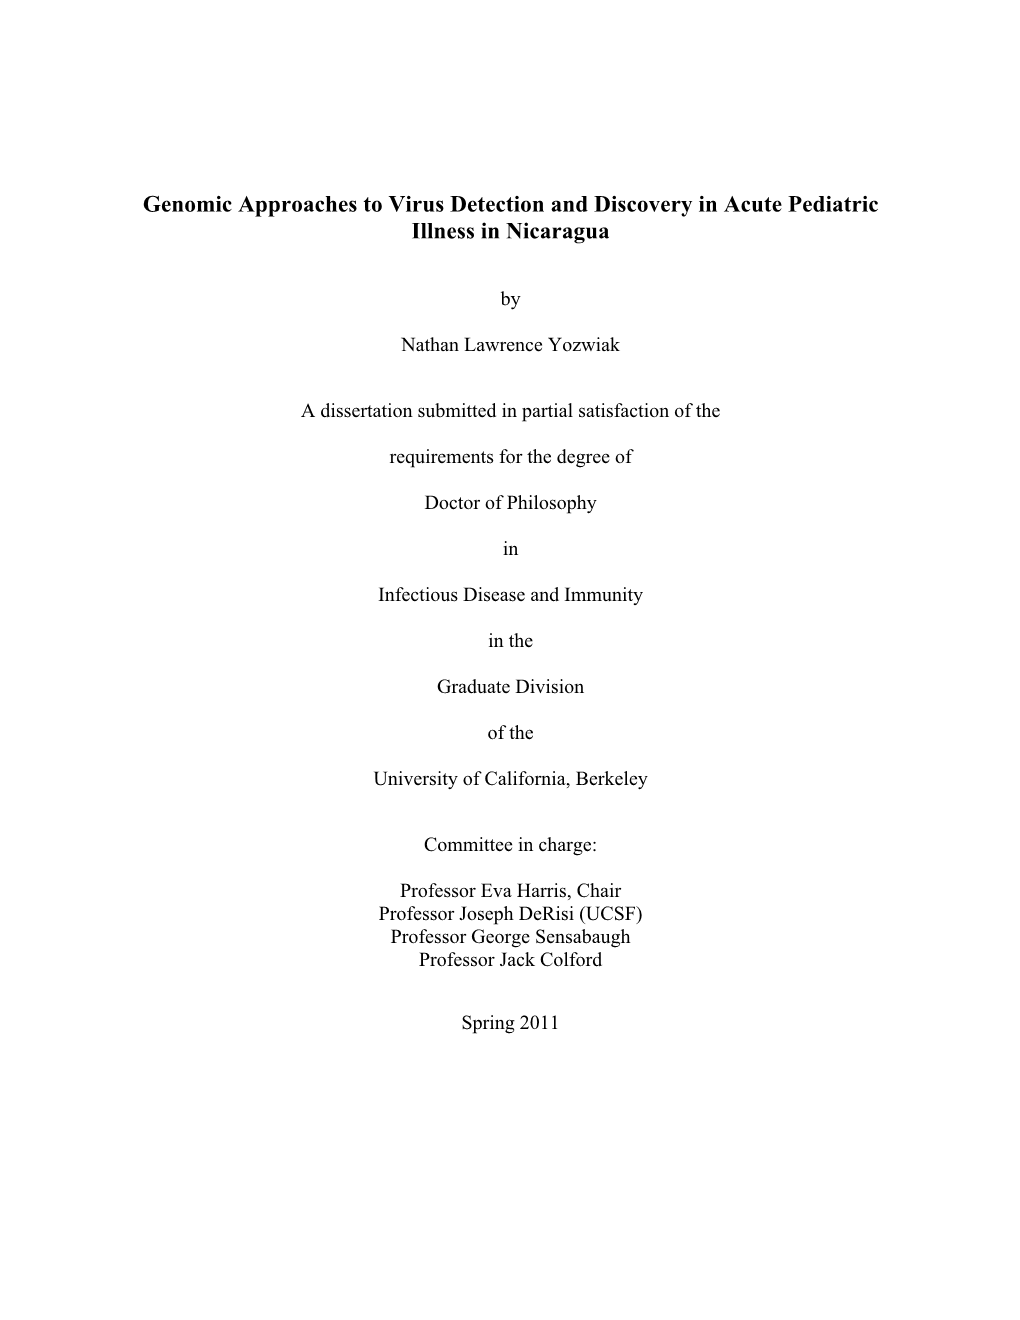 Genomic Approaches to Virus Detection and Discovery in Acute Pediatric Illness in Nicaragua